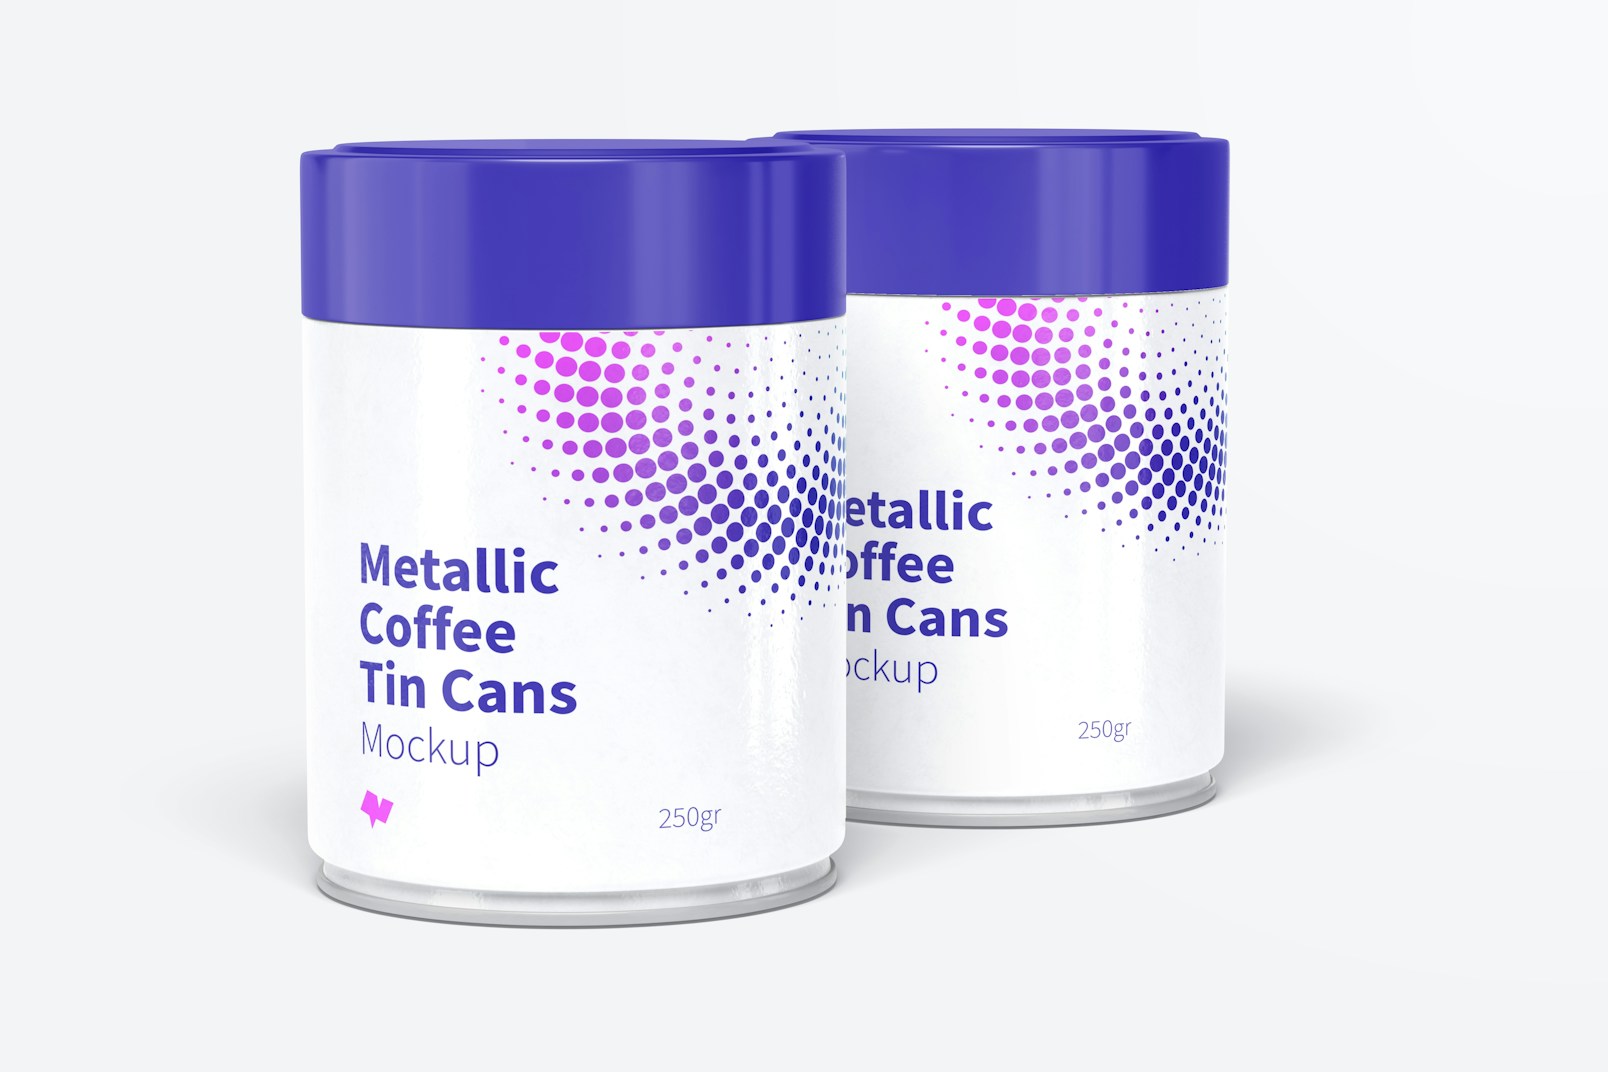 Metallic Coffee Tin Cans with Plastic Lids Mockup, Closed